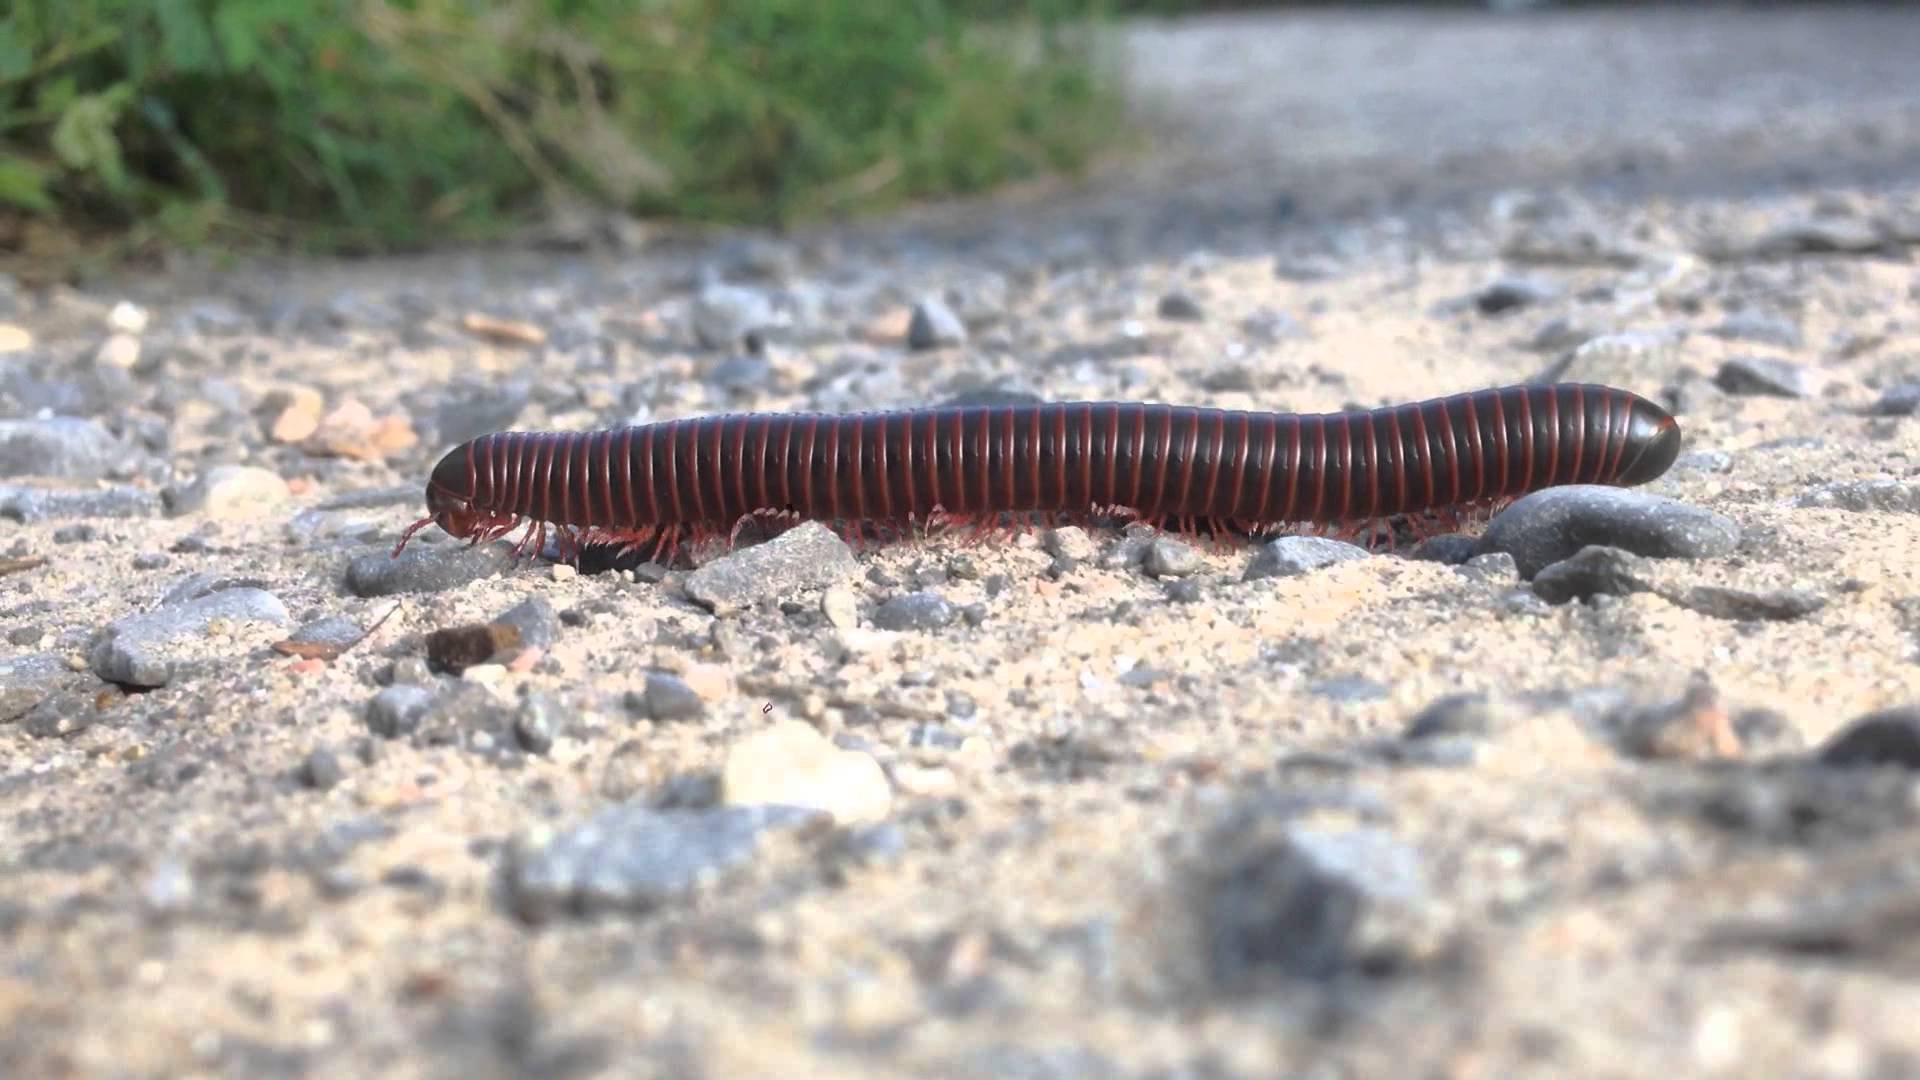 Millie the millipede - YouTube